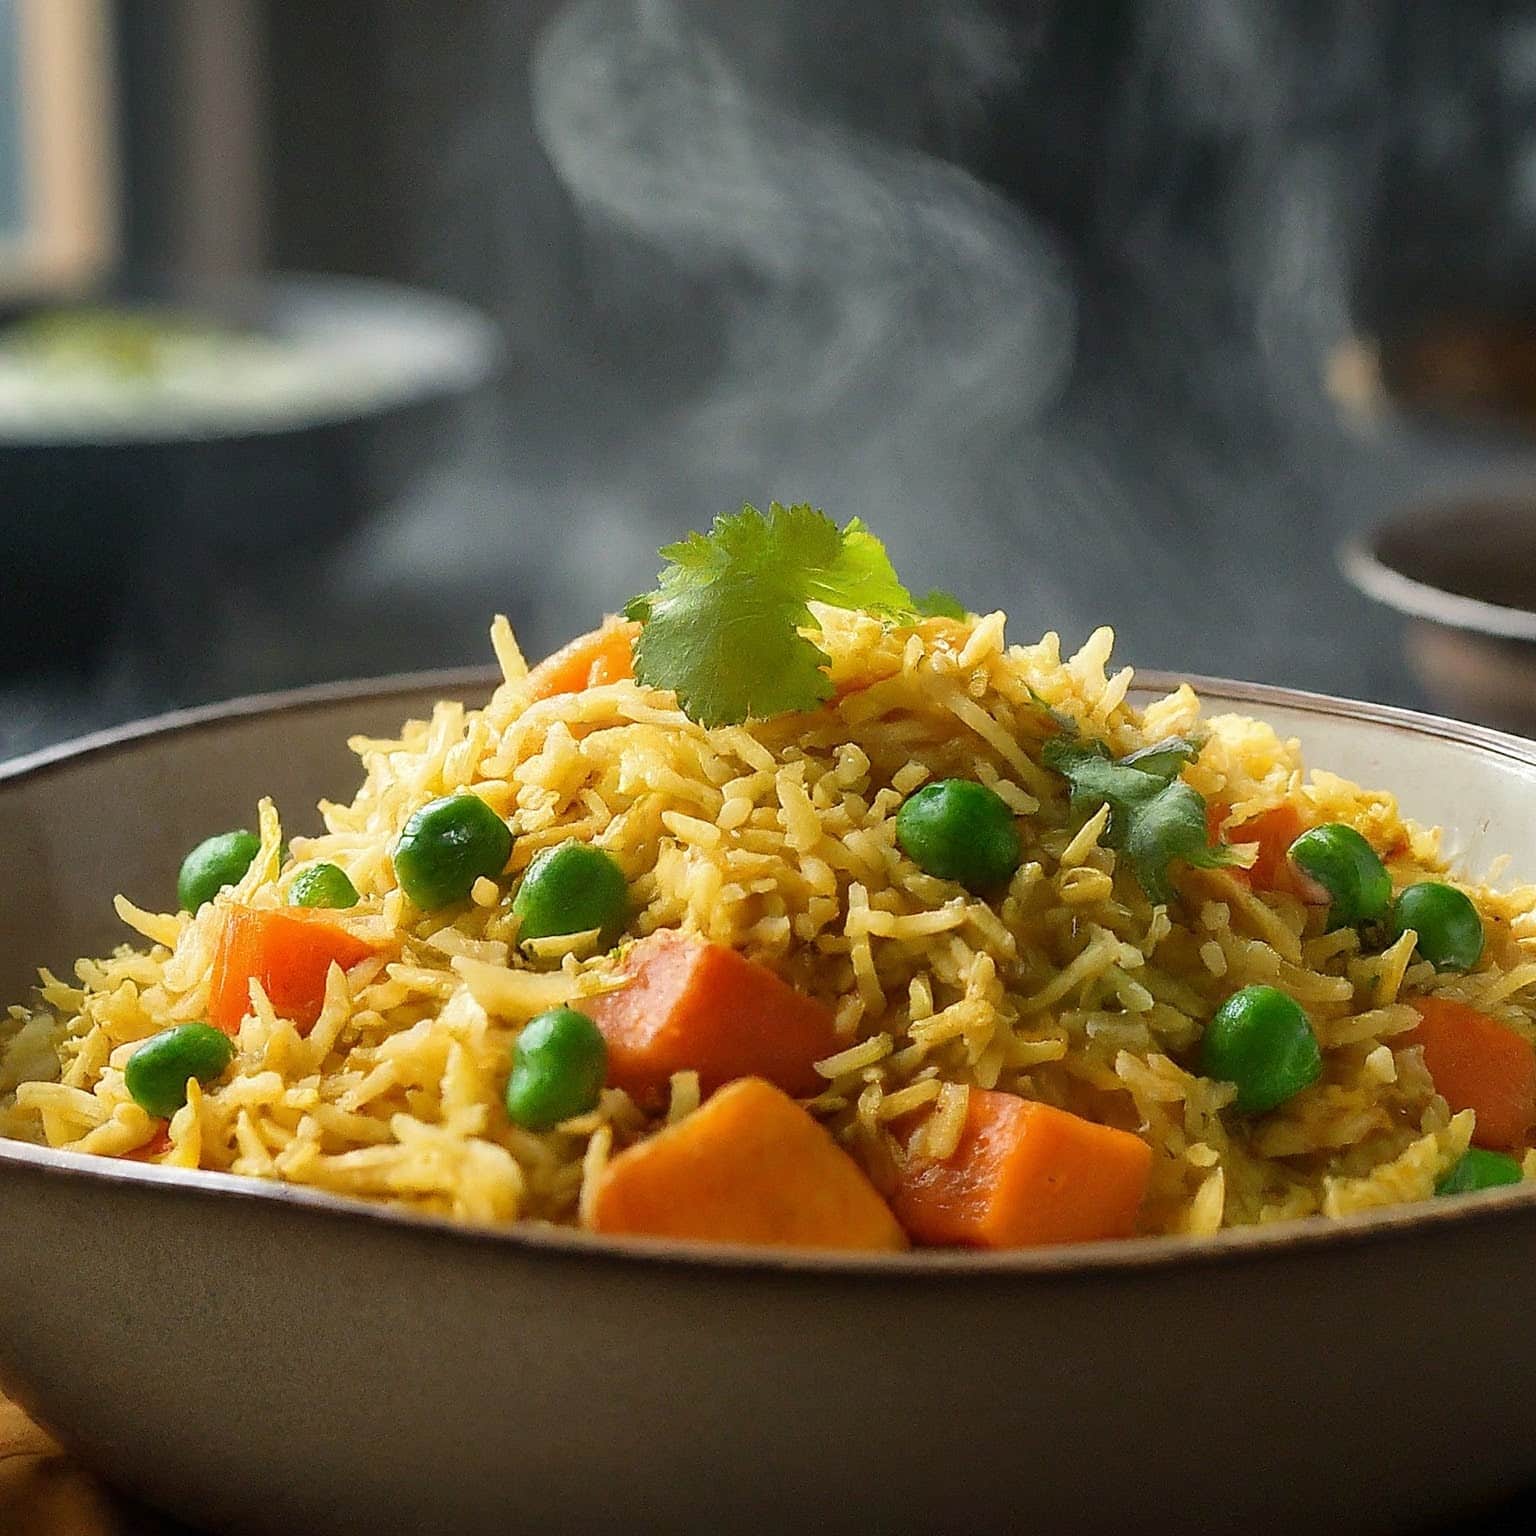 A delicious and colorful dish of Pulao, a fragrant Indian rice dish with vegetables and spices.